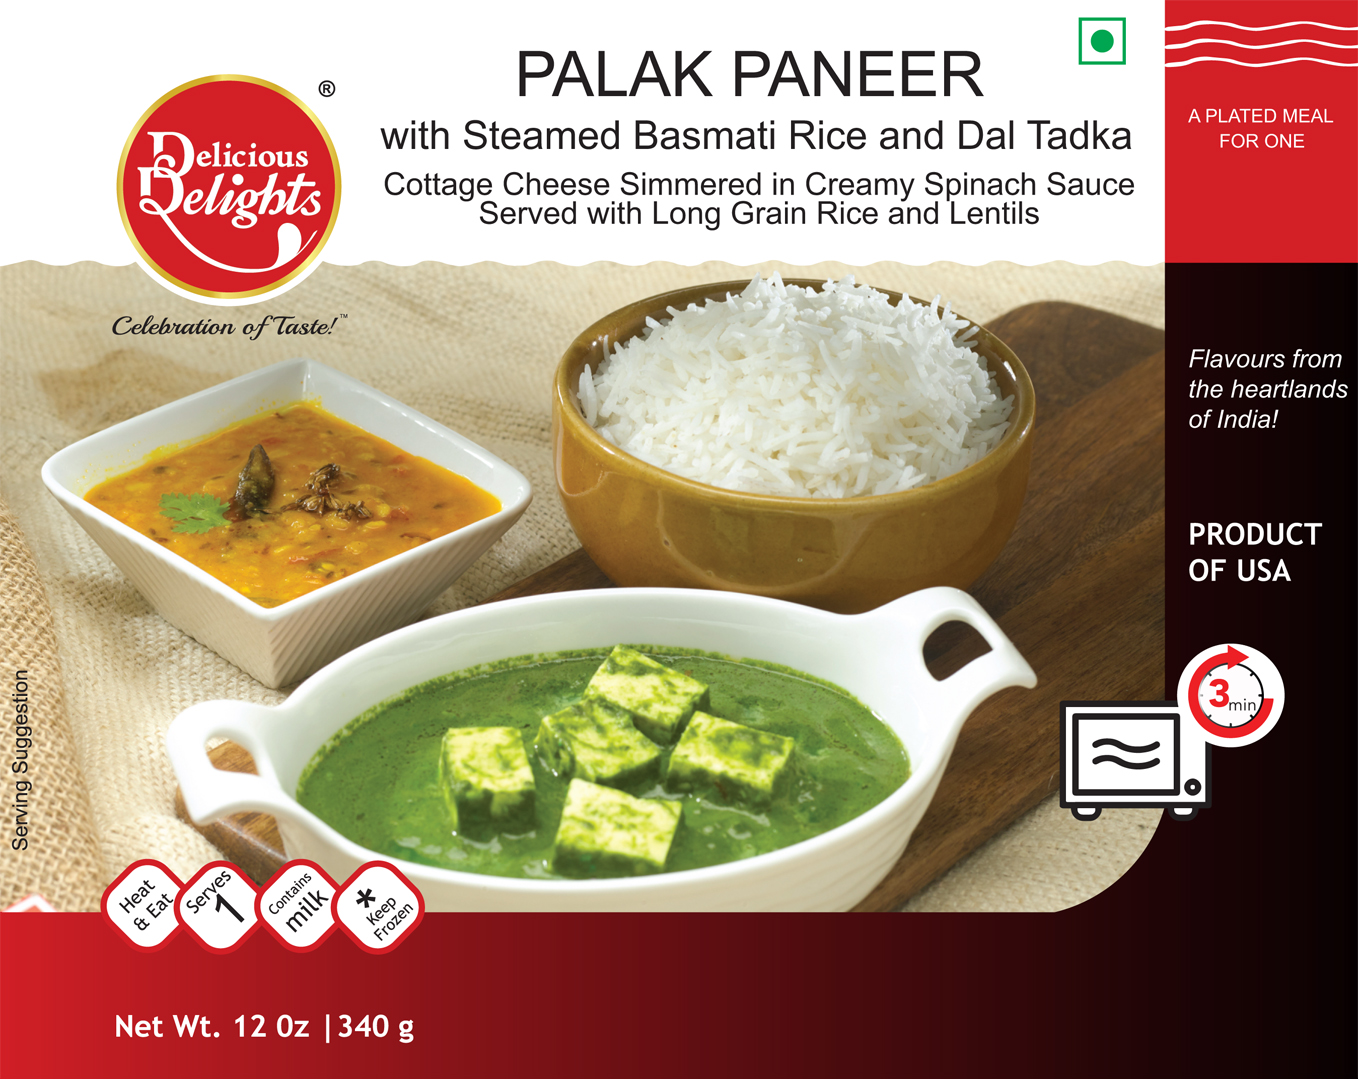 Delicious Delights Palak Paneer with Steamed Basmati Rice and Dal Tadka